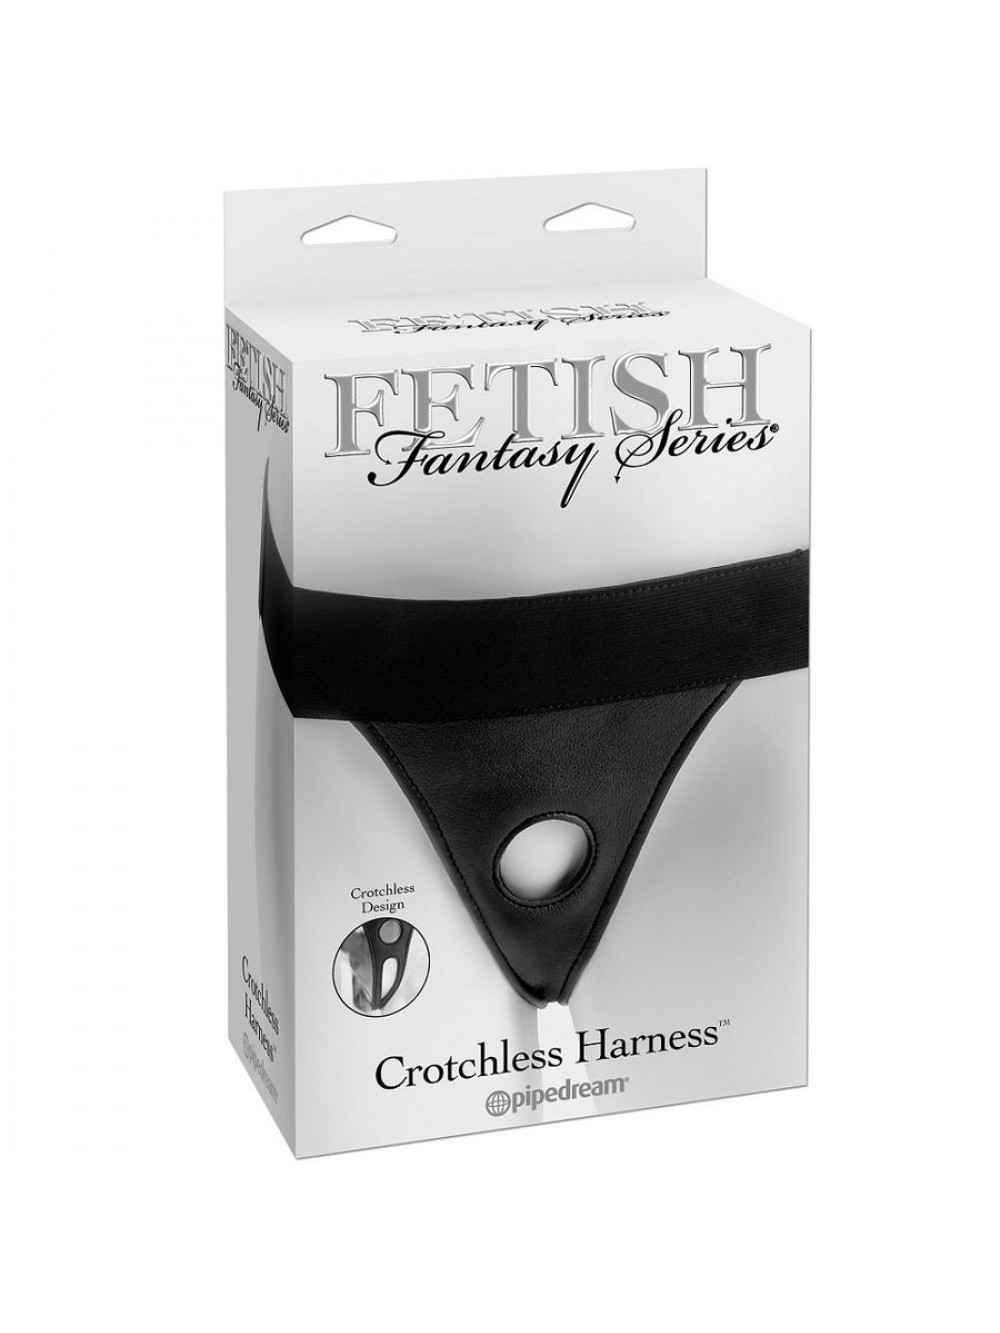 CROTCHLESS HARNESS